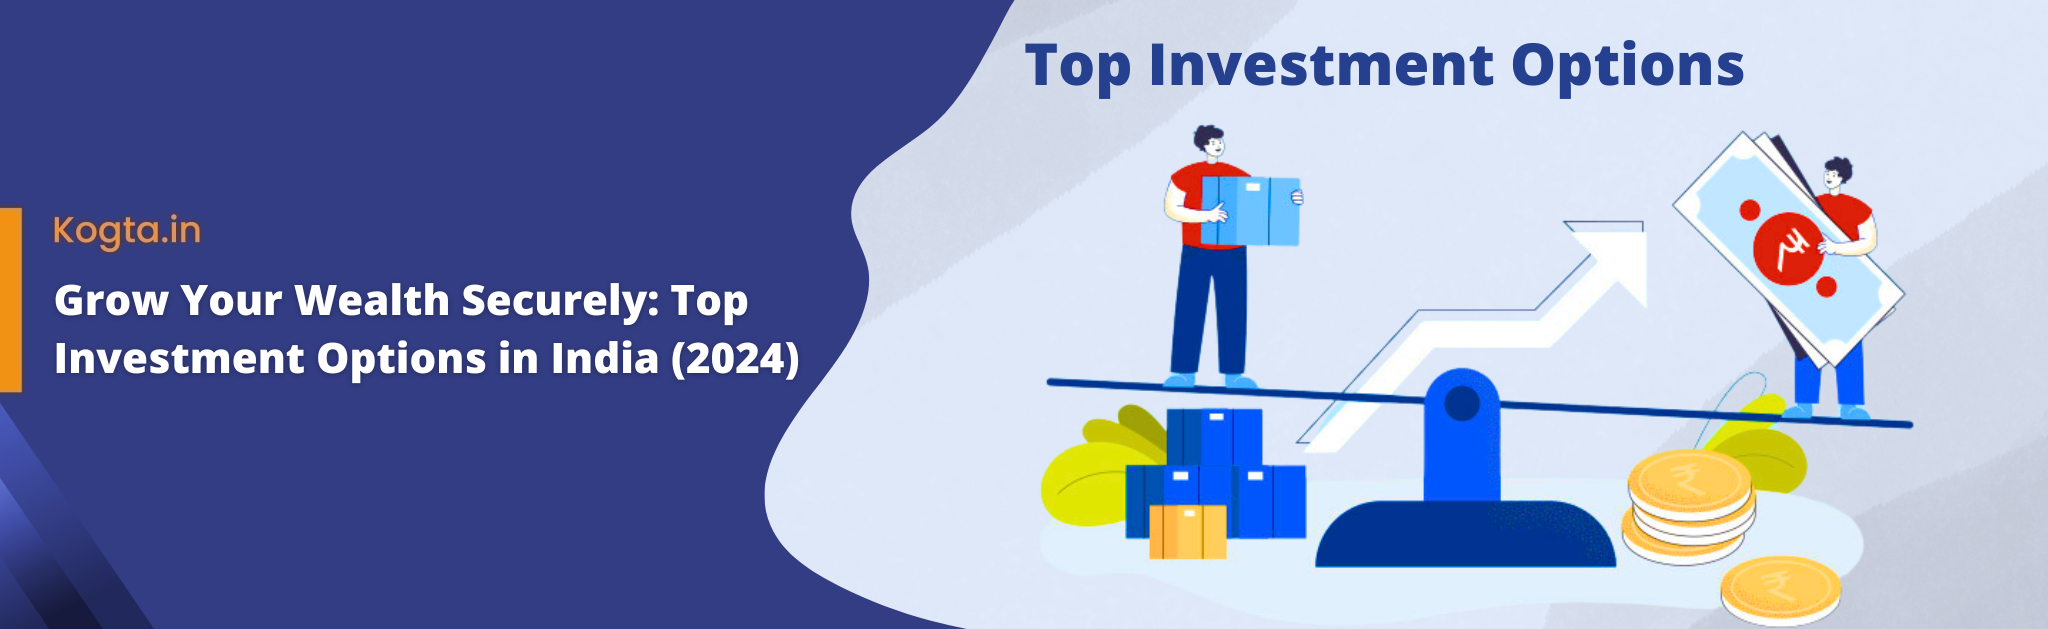 Financial Investment: Top Investment Options in India (2024)